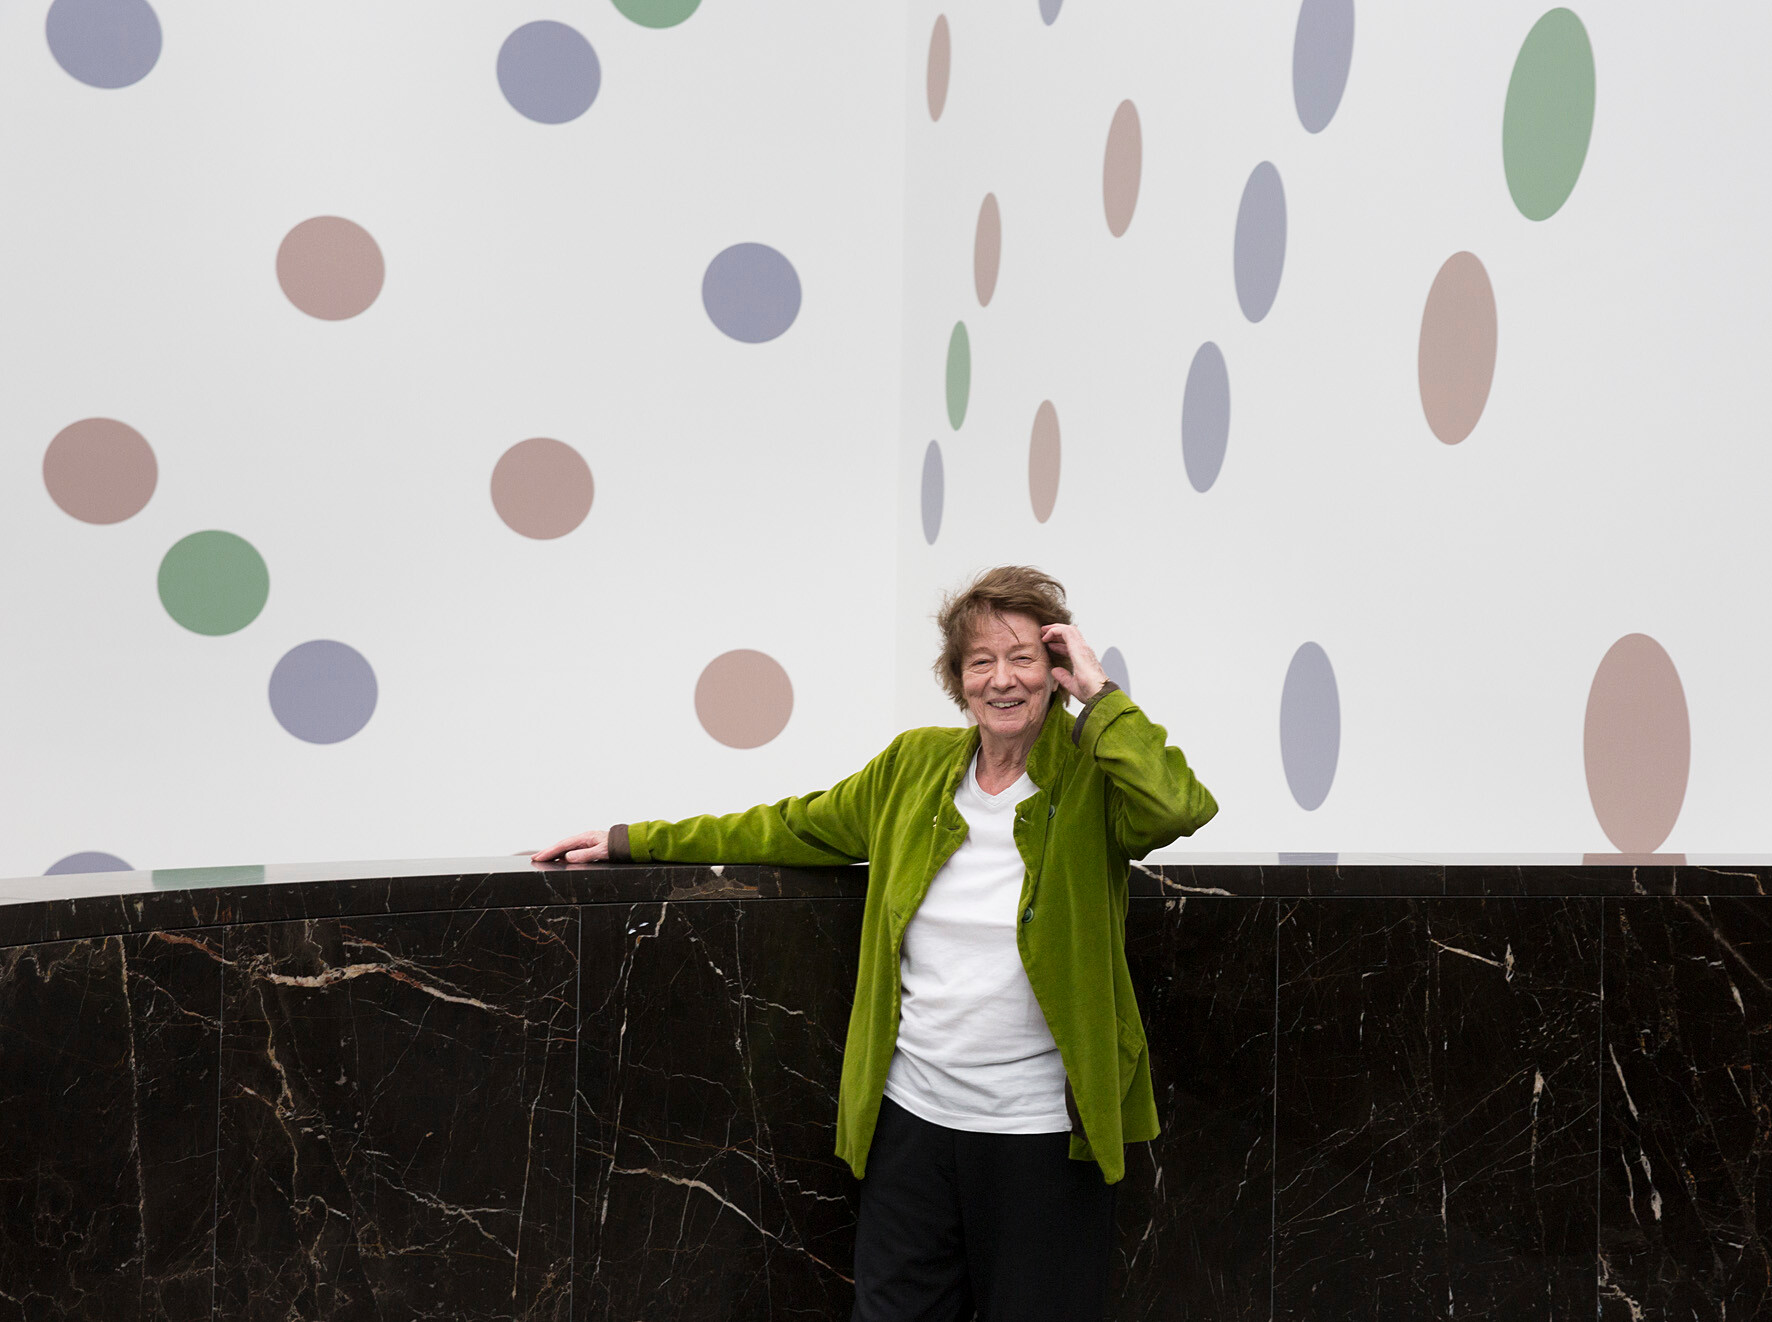 A photograph of Bridget Riley in front of her mural titled Messengers at The National Gallery in London, dated 2018.